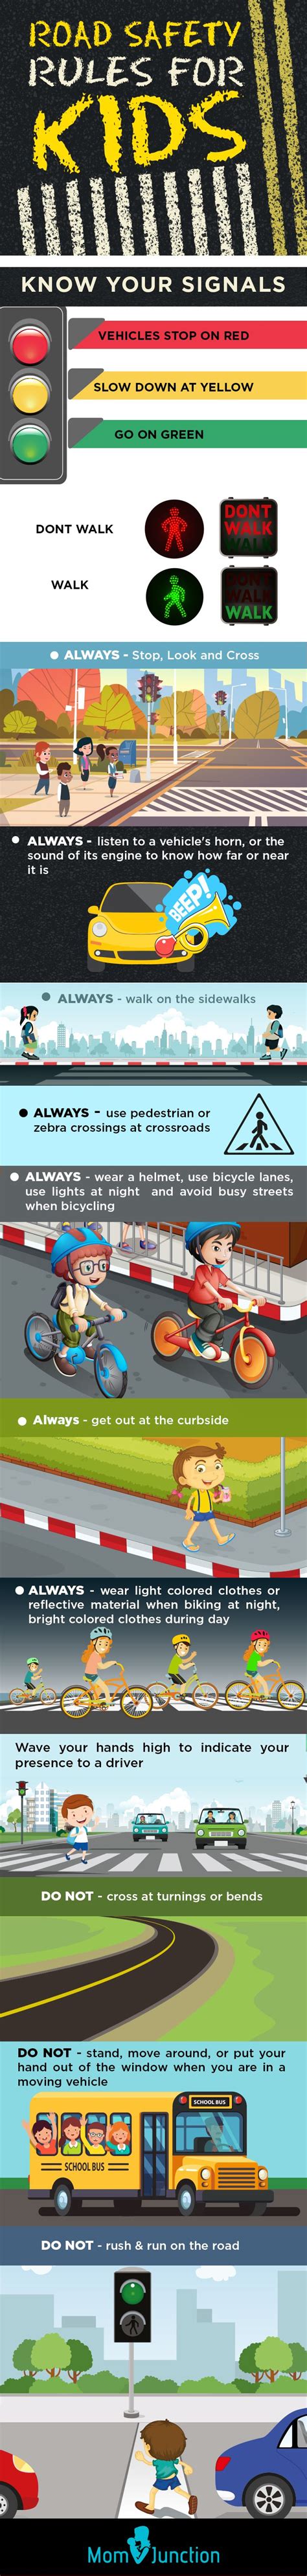 13 Important Road Safety Rules To Teach Your Children Safety Rules